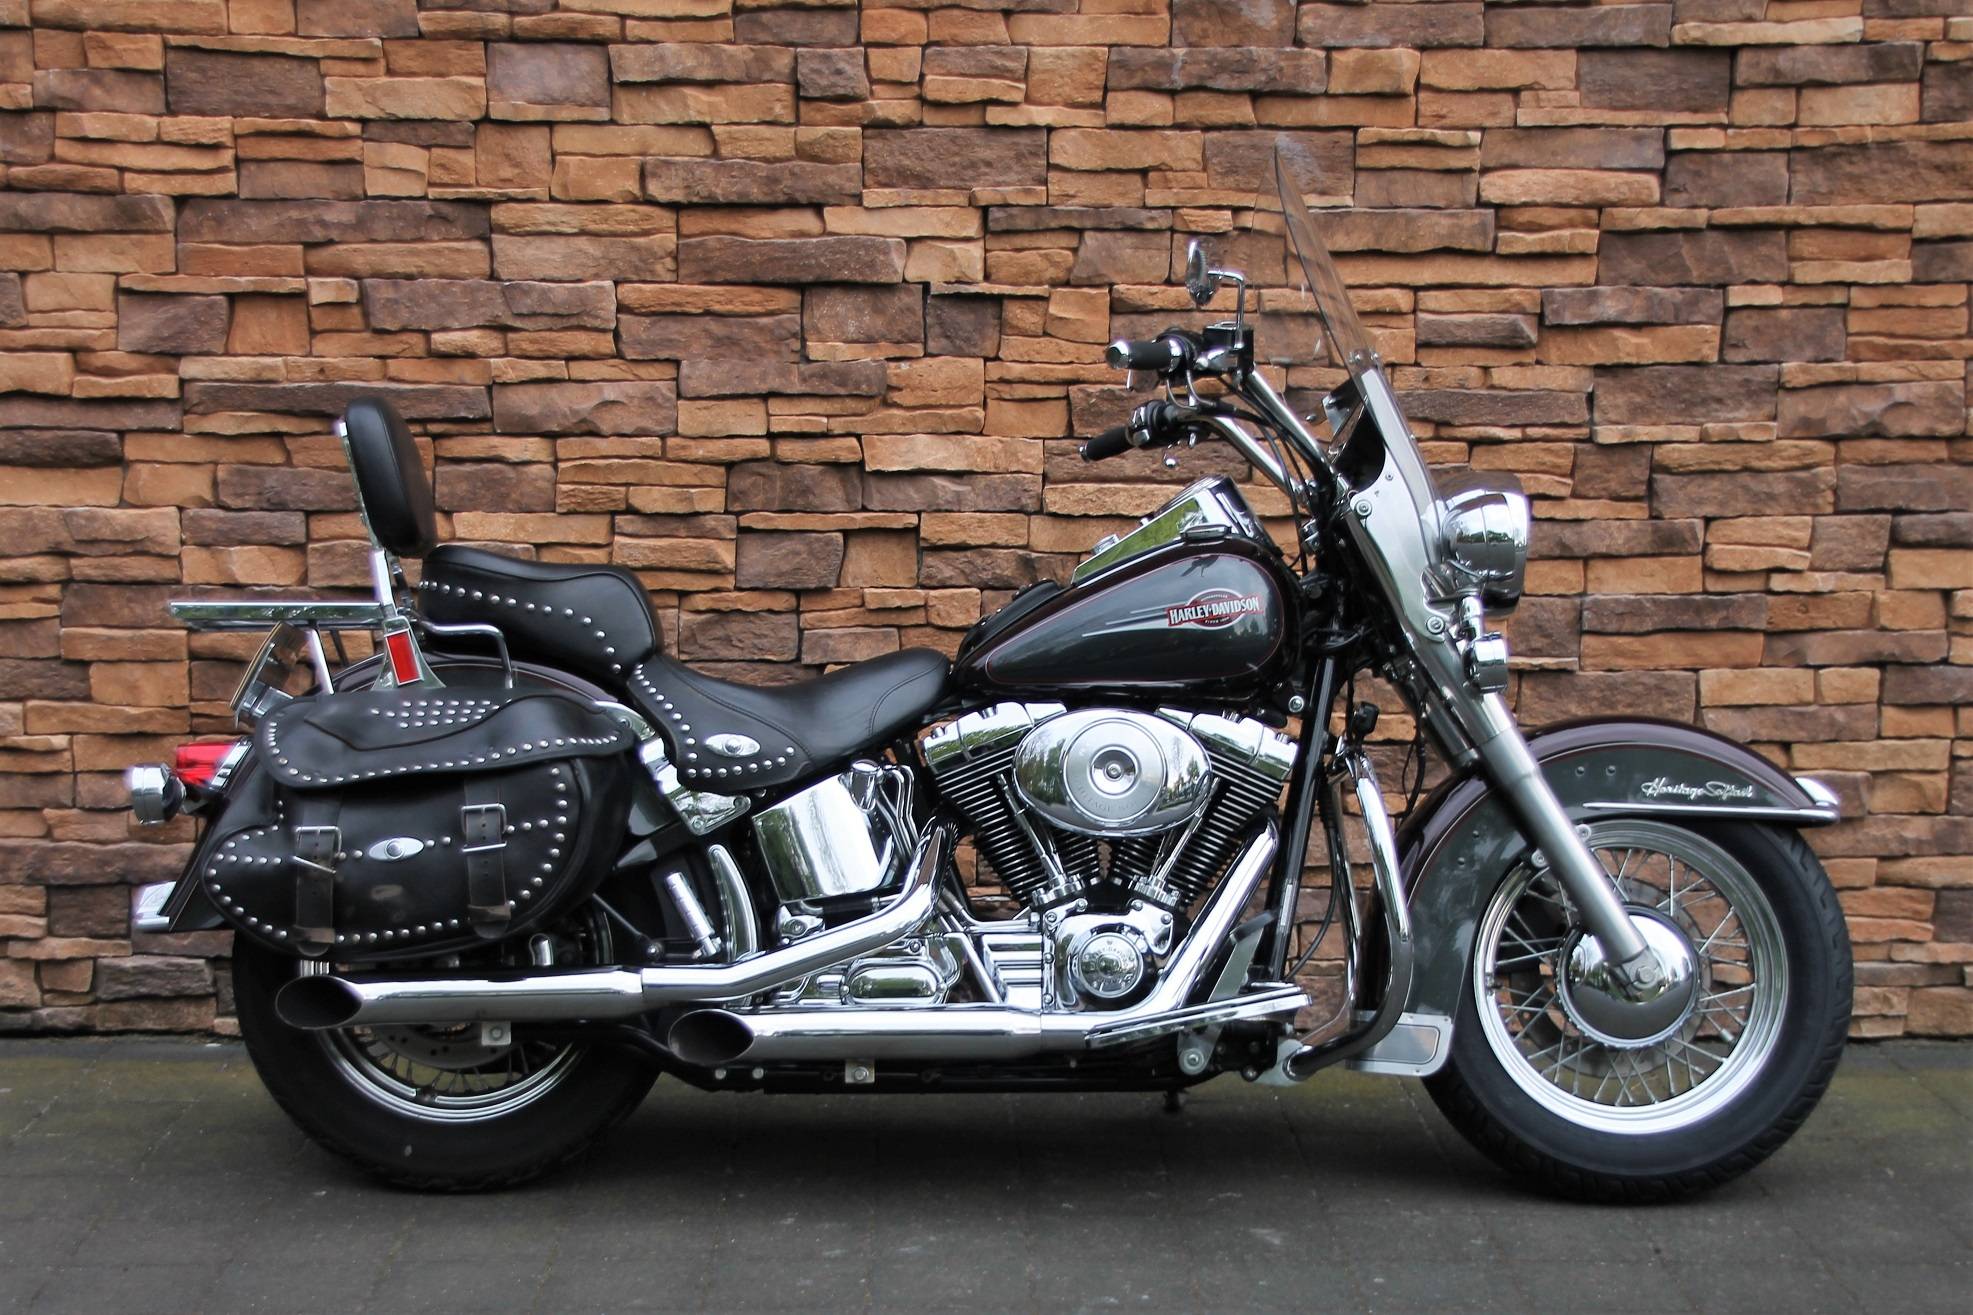 Harley davidson heritage softail vs road king: which one is the best & why?